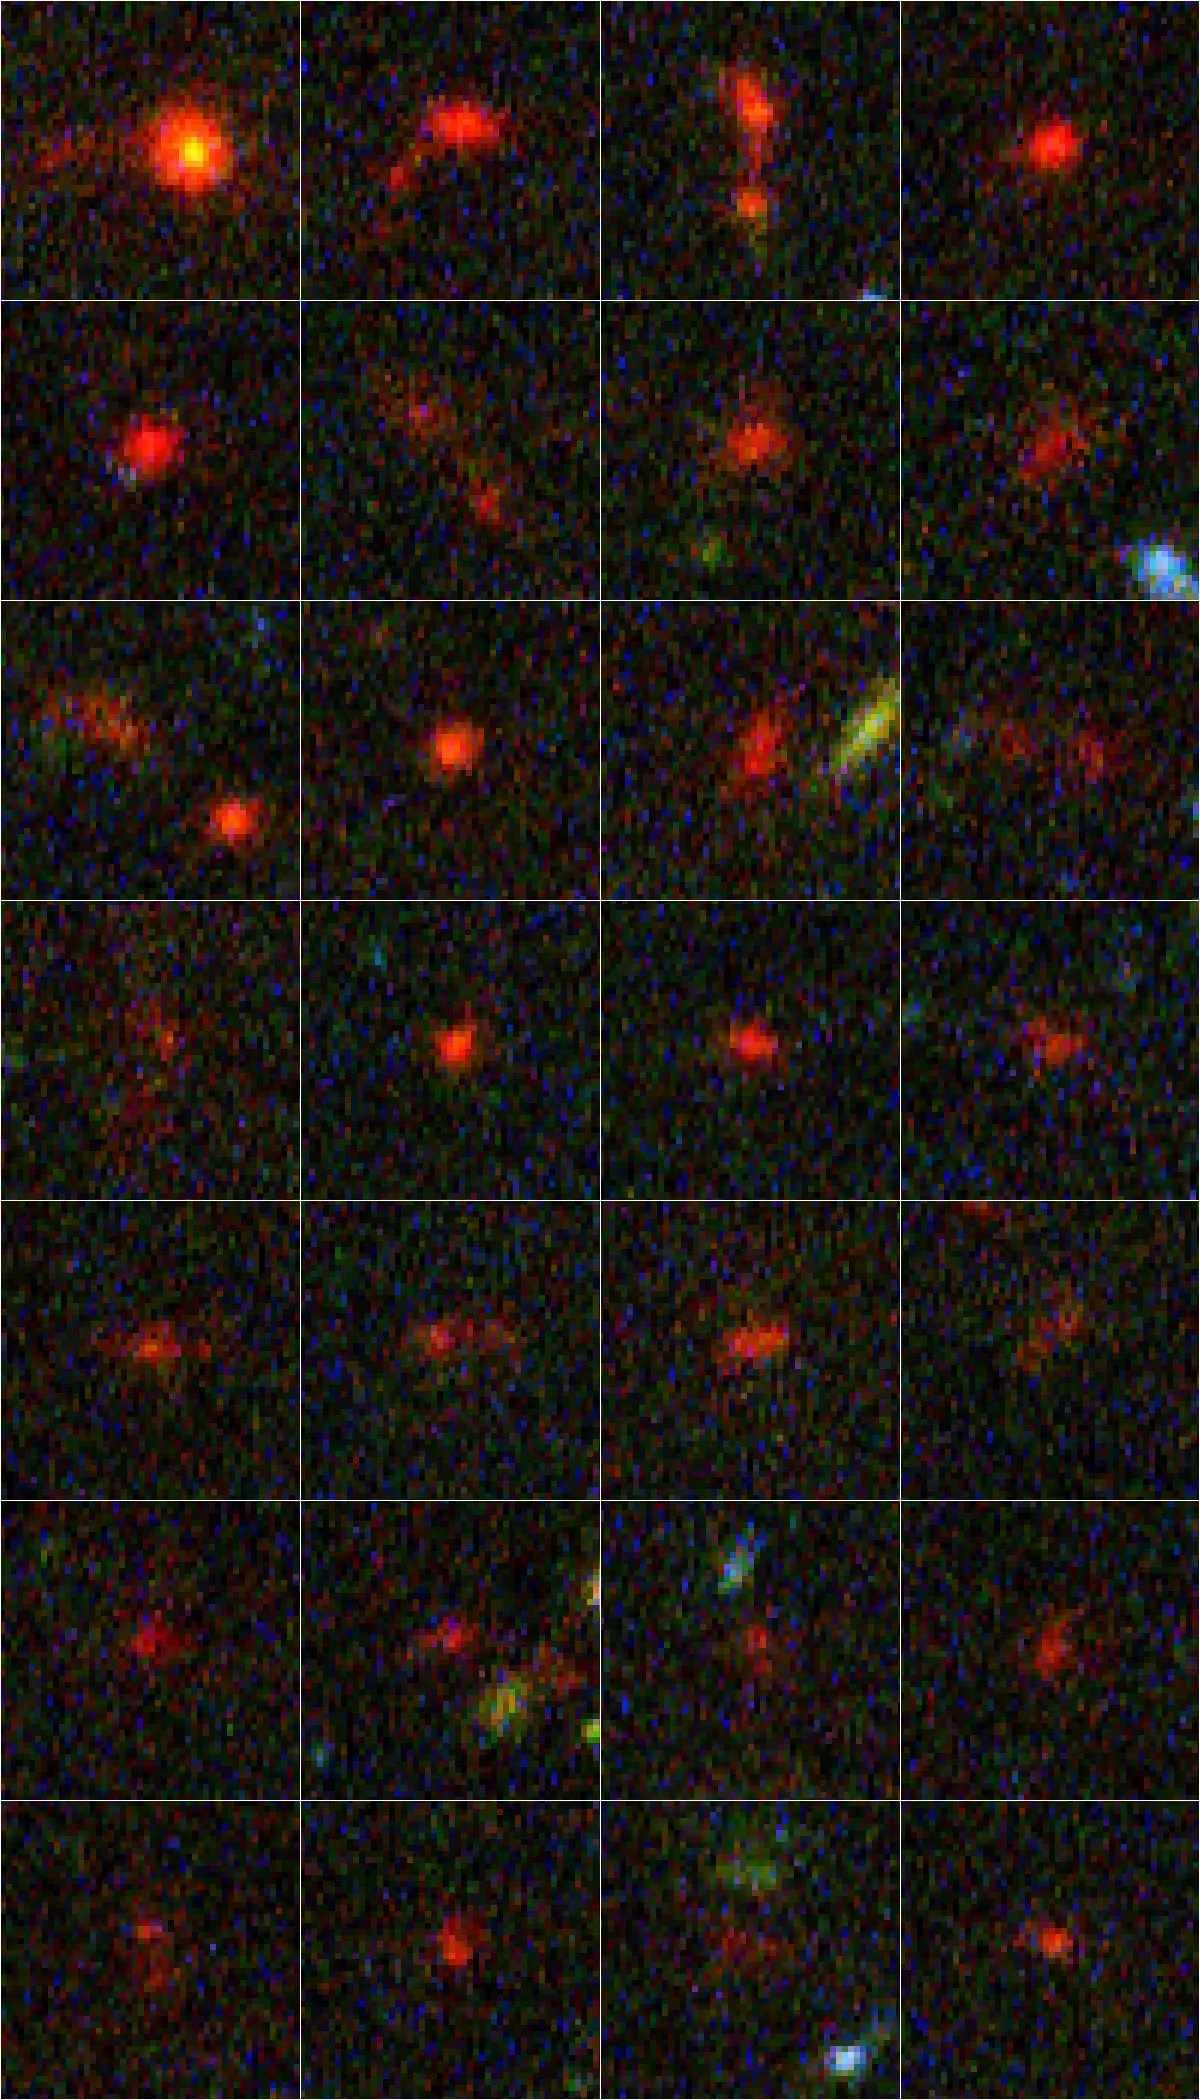 faint, distant galaxies, observed by Hubble